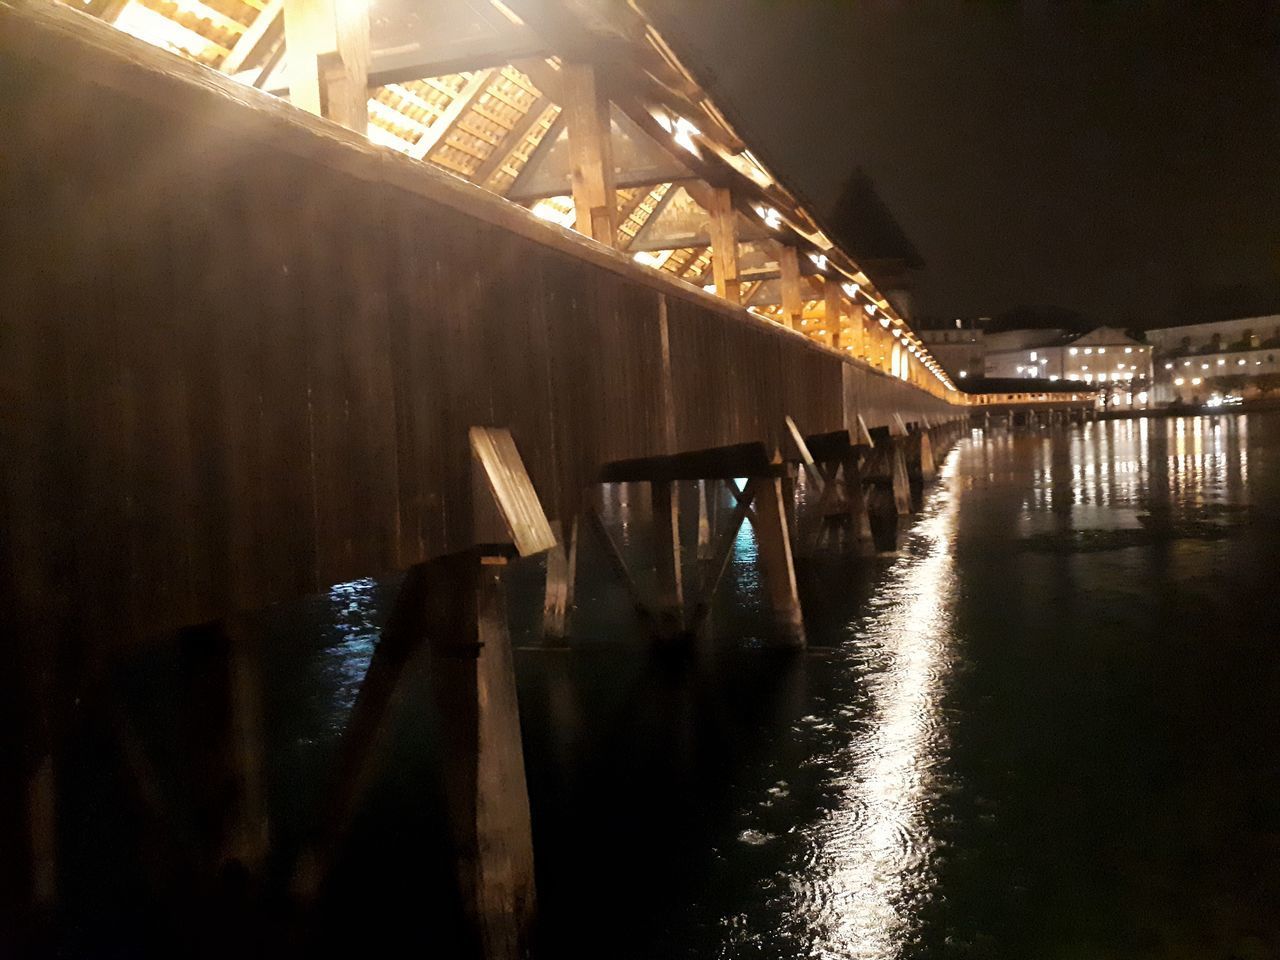 LOW ANGLE VIEW OF ILLUMINATED BRIDGE OVER RIVER